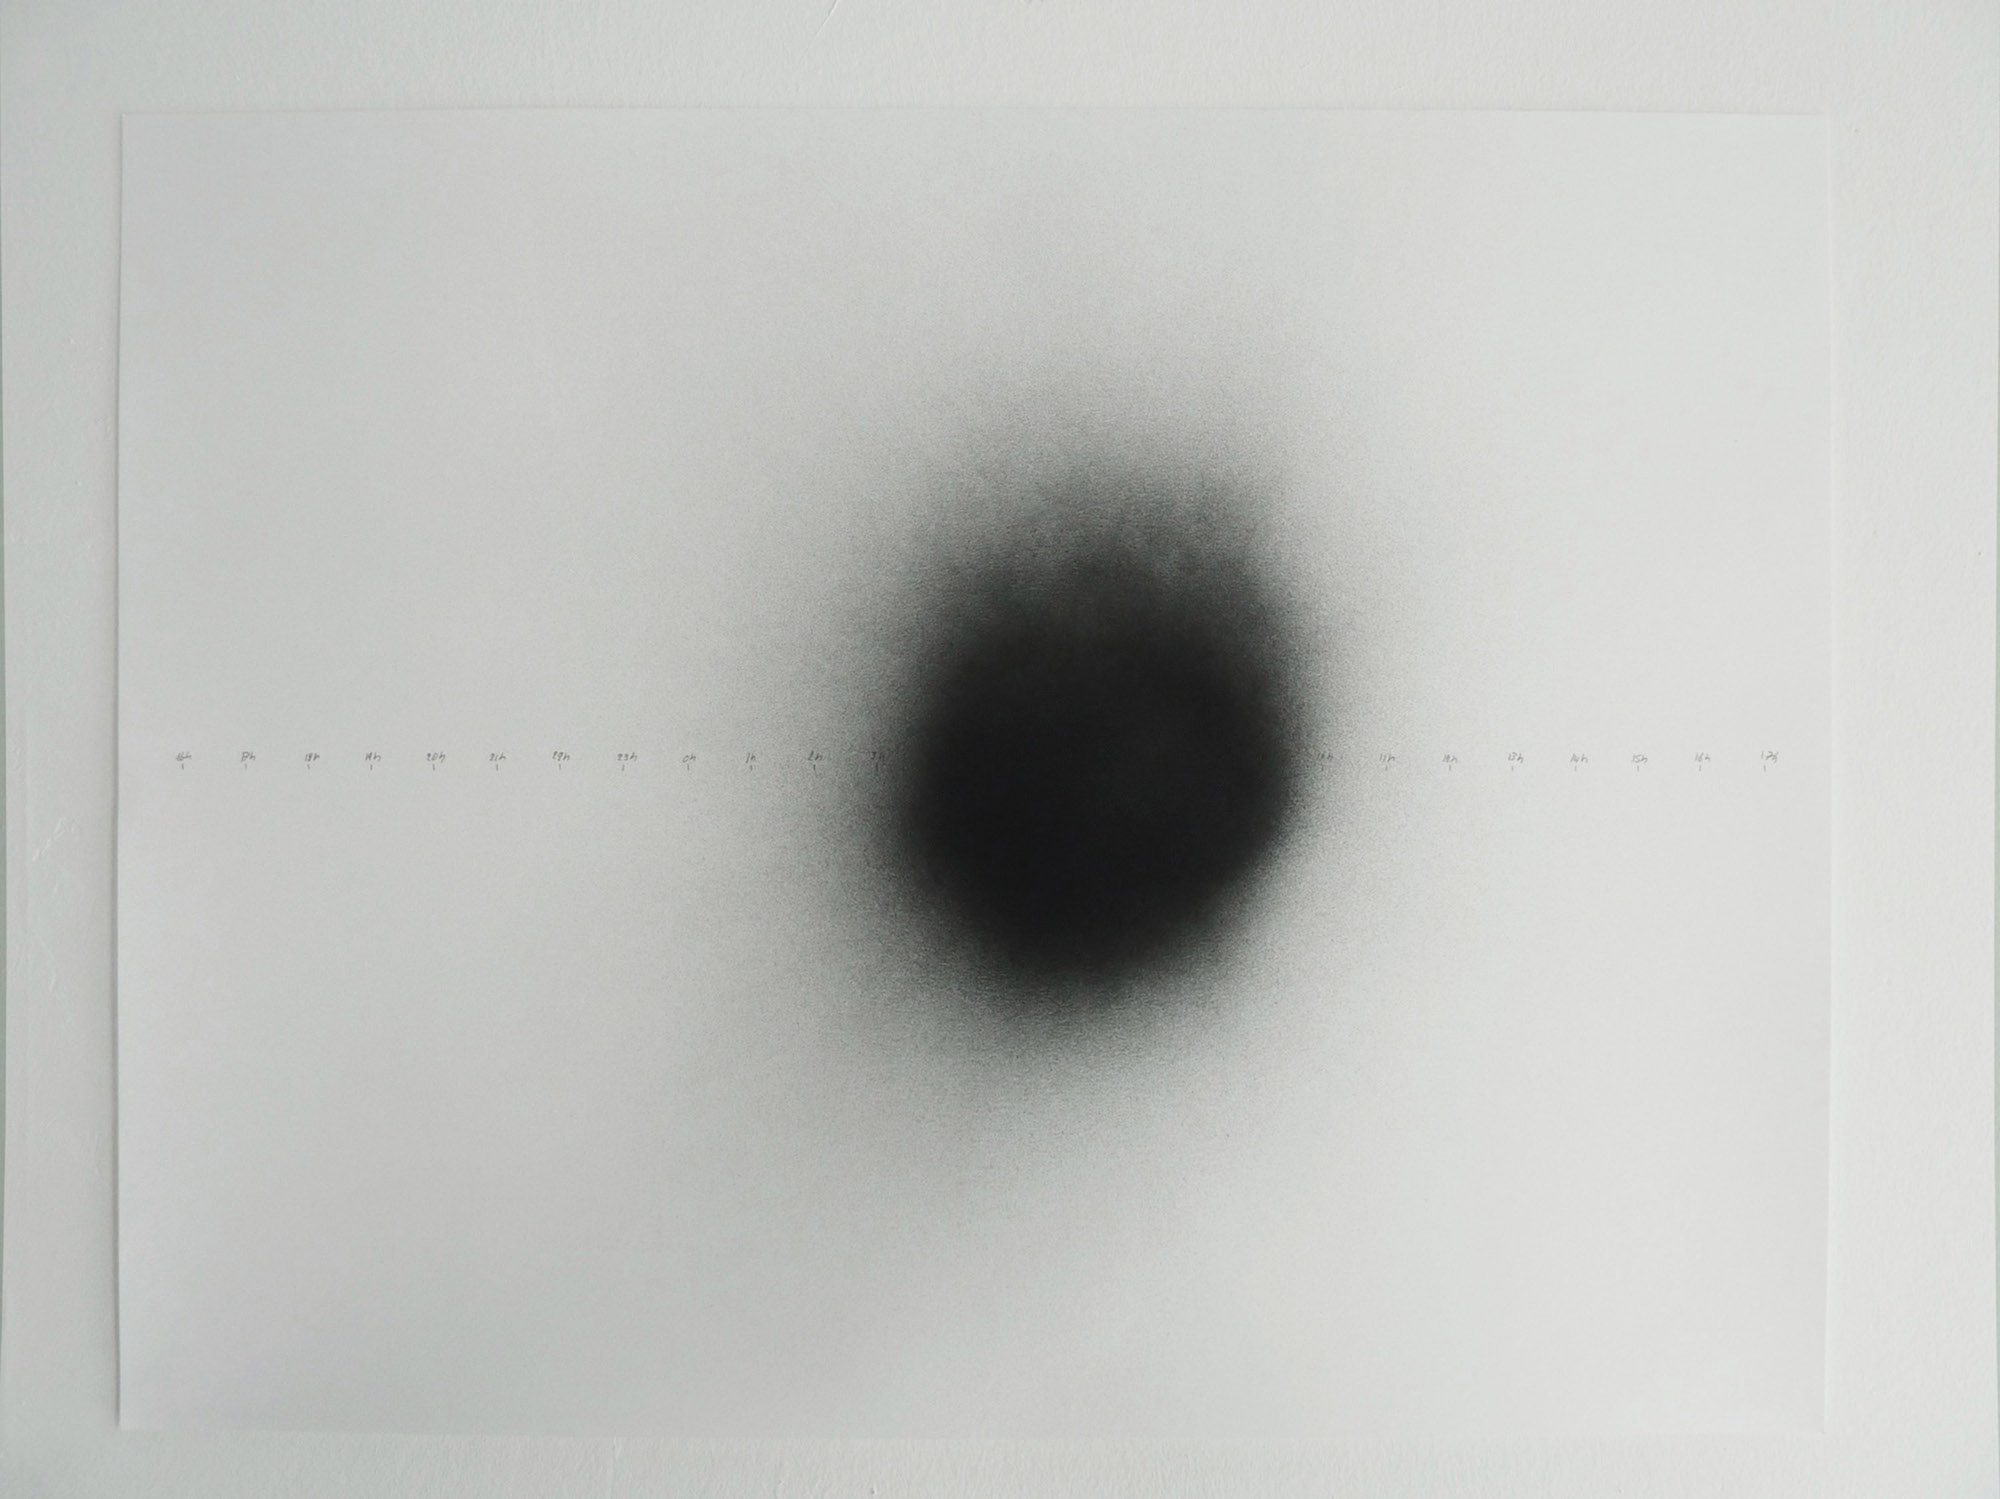  Charbel-joseph H. Boutros  No Light In White Light / Nights Cartography 2014 Spray and carbon on paper 50 x 70 cm 